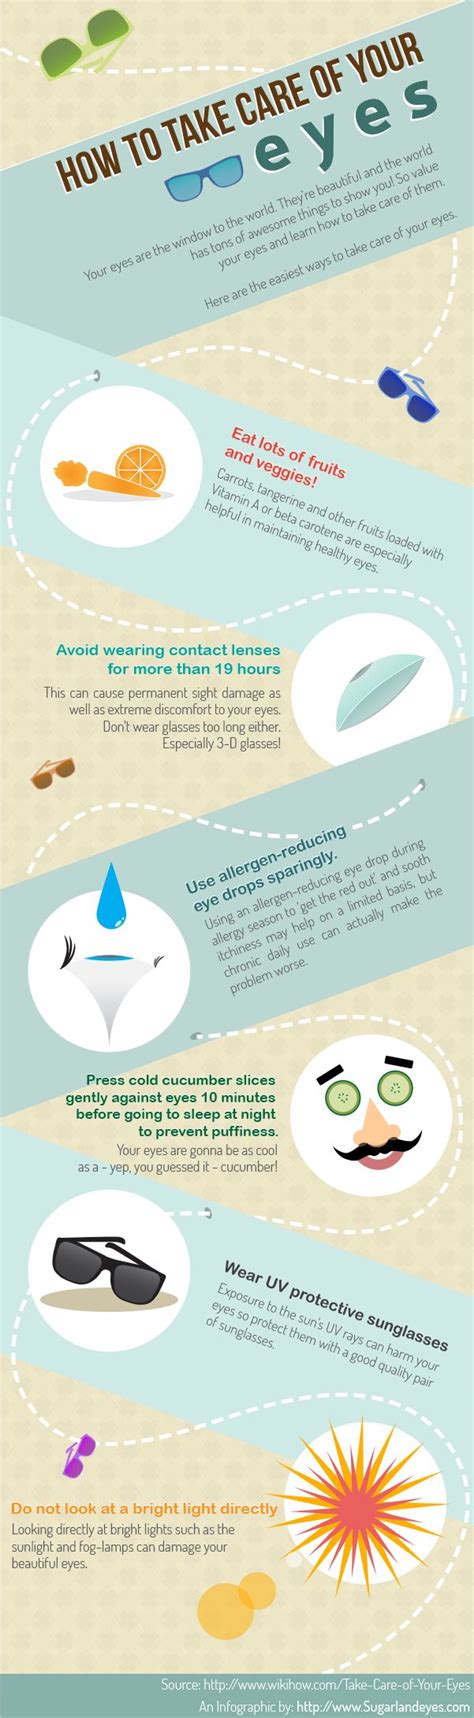 How To Take Care Of Your Eyes Eye Care Health Health Tips Skin Care